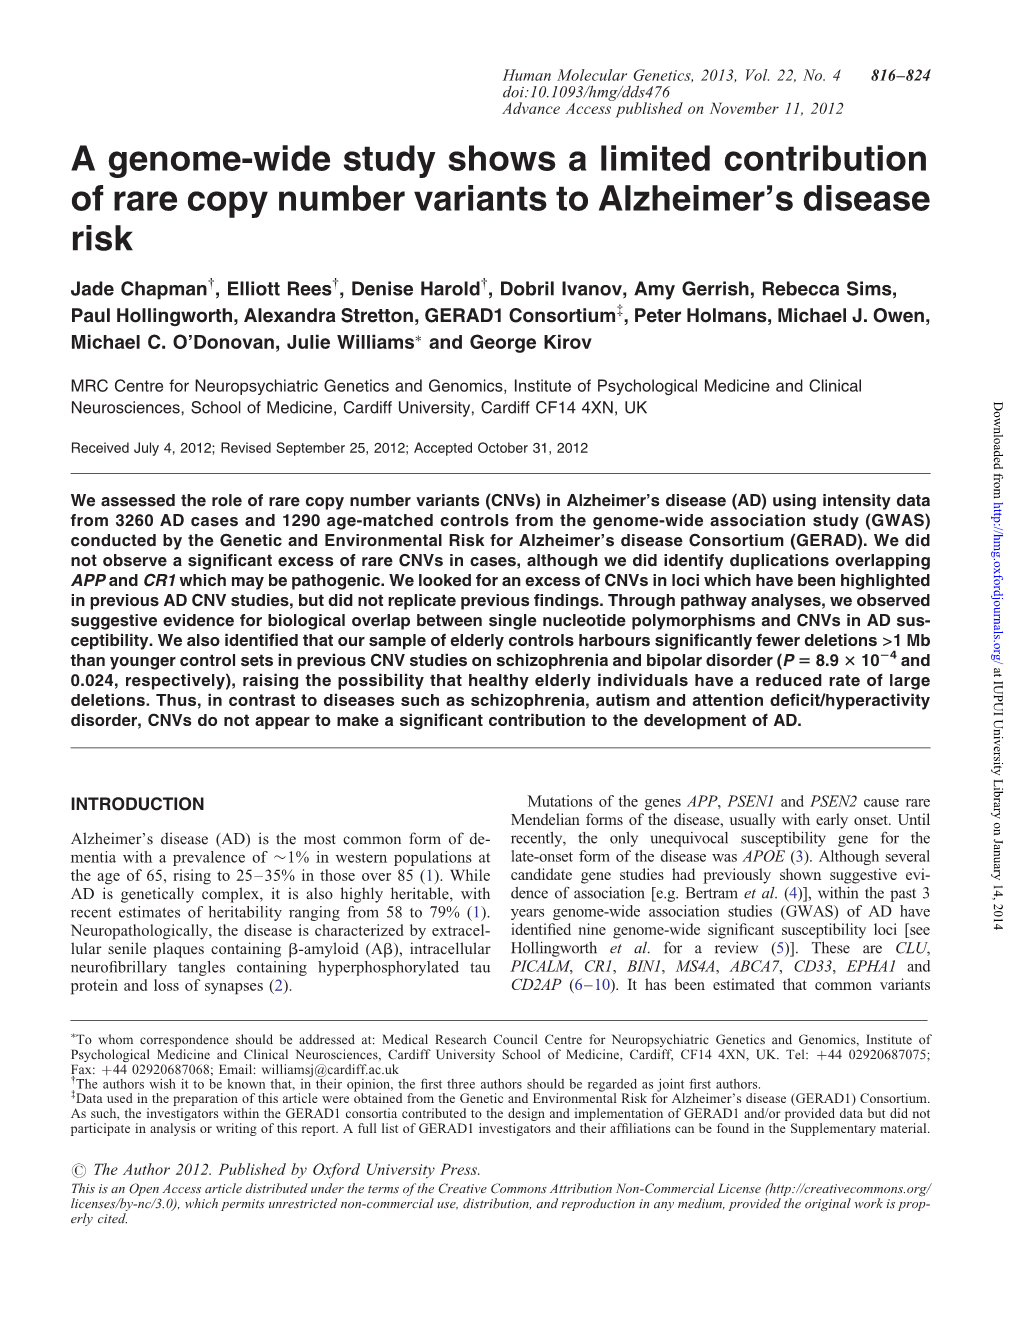 A Genome-Wide Study Shows a Limited Contribution of Rare Copy Number Variants to Alzheimer's Disease Risk